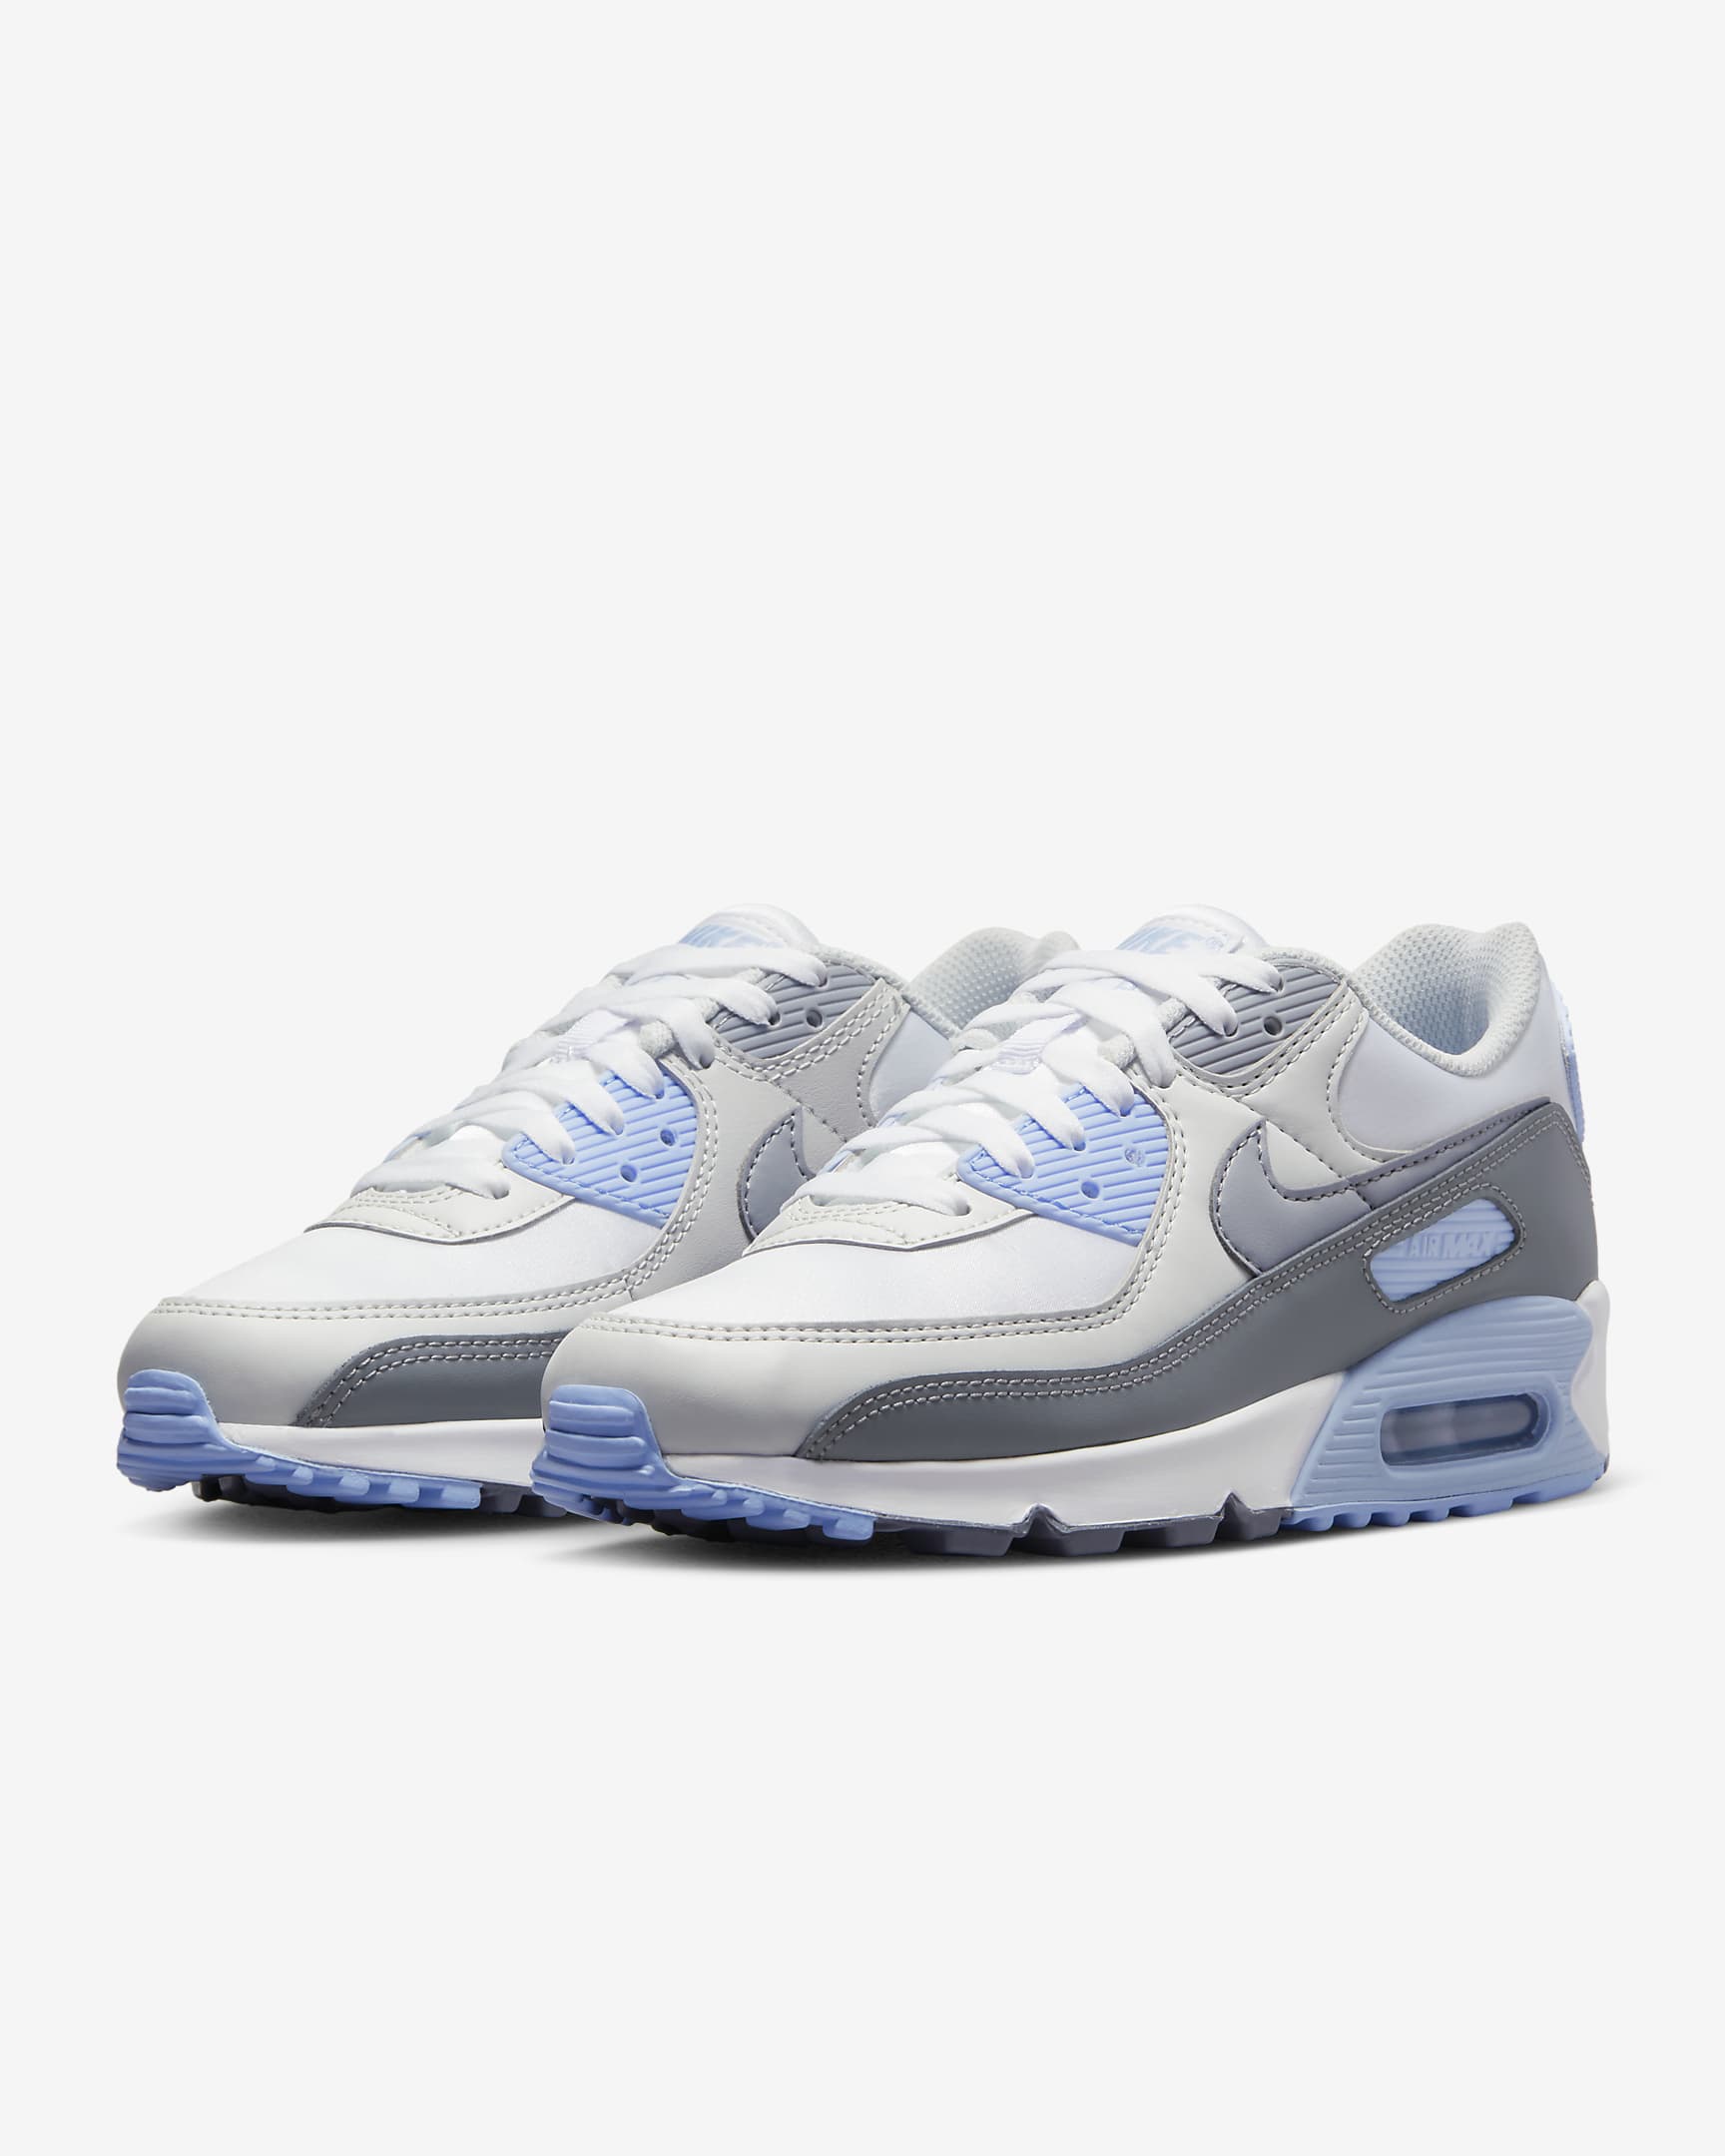 Nike Air Max 90 Women's Trainers Sneakers Fashion Shoes